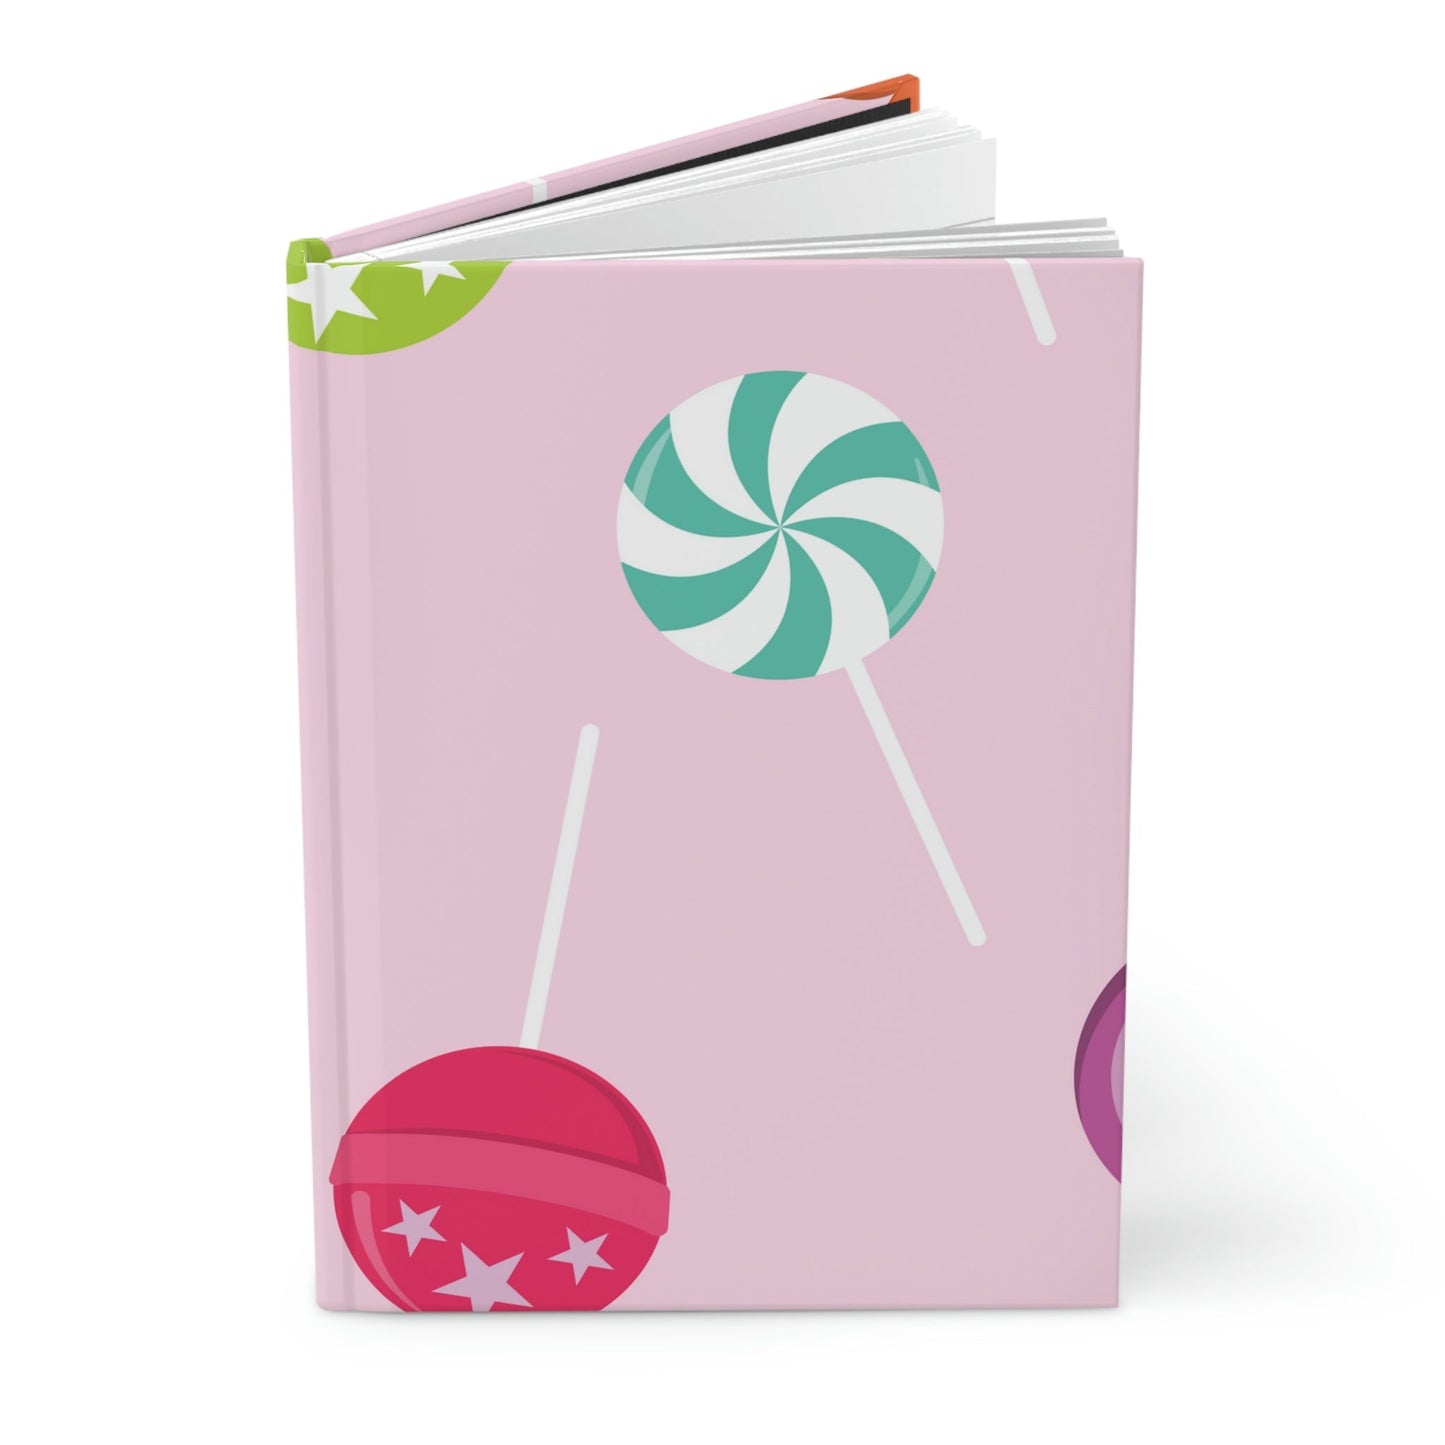 Lollipop Lane Hardcover Matte Journal Paper products Pink Sweetheart